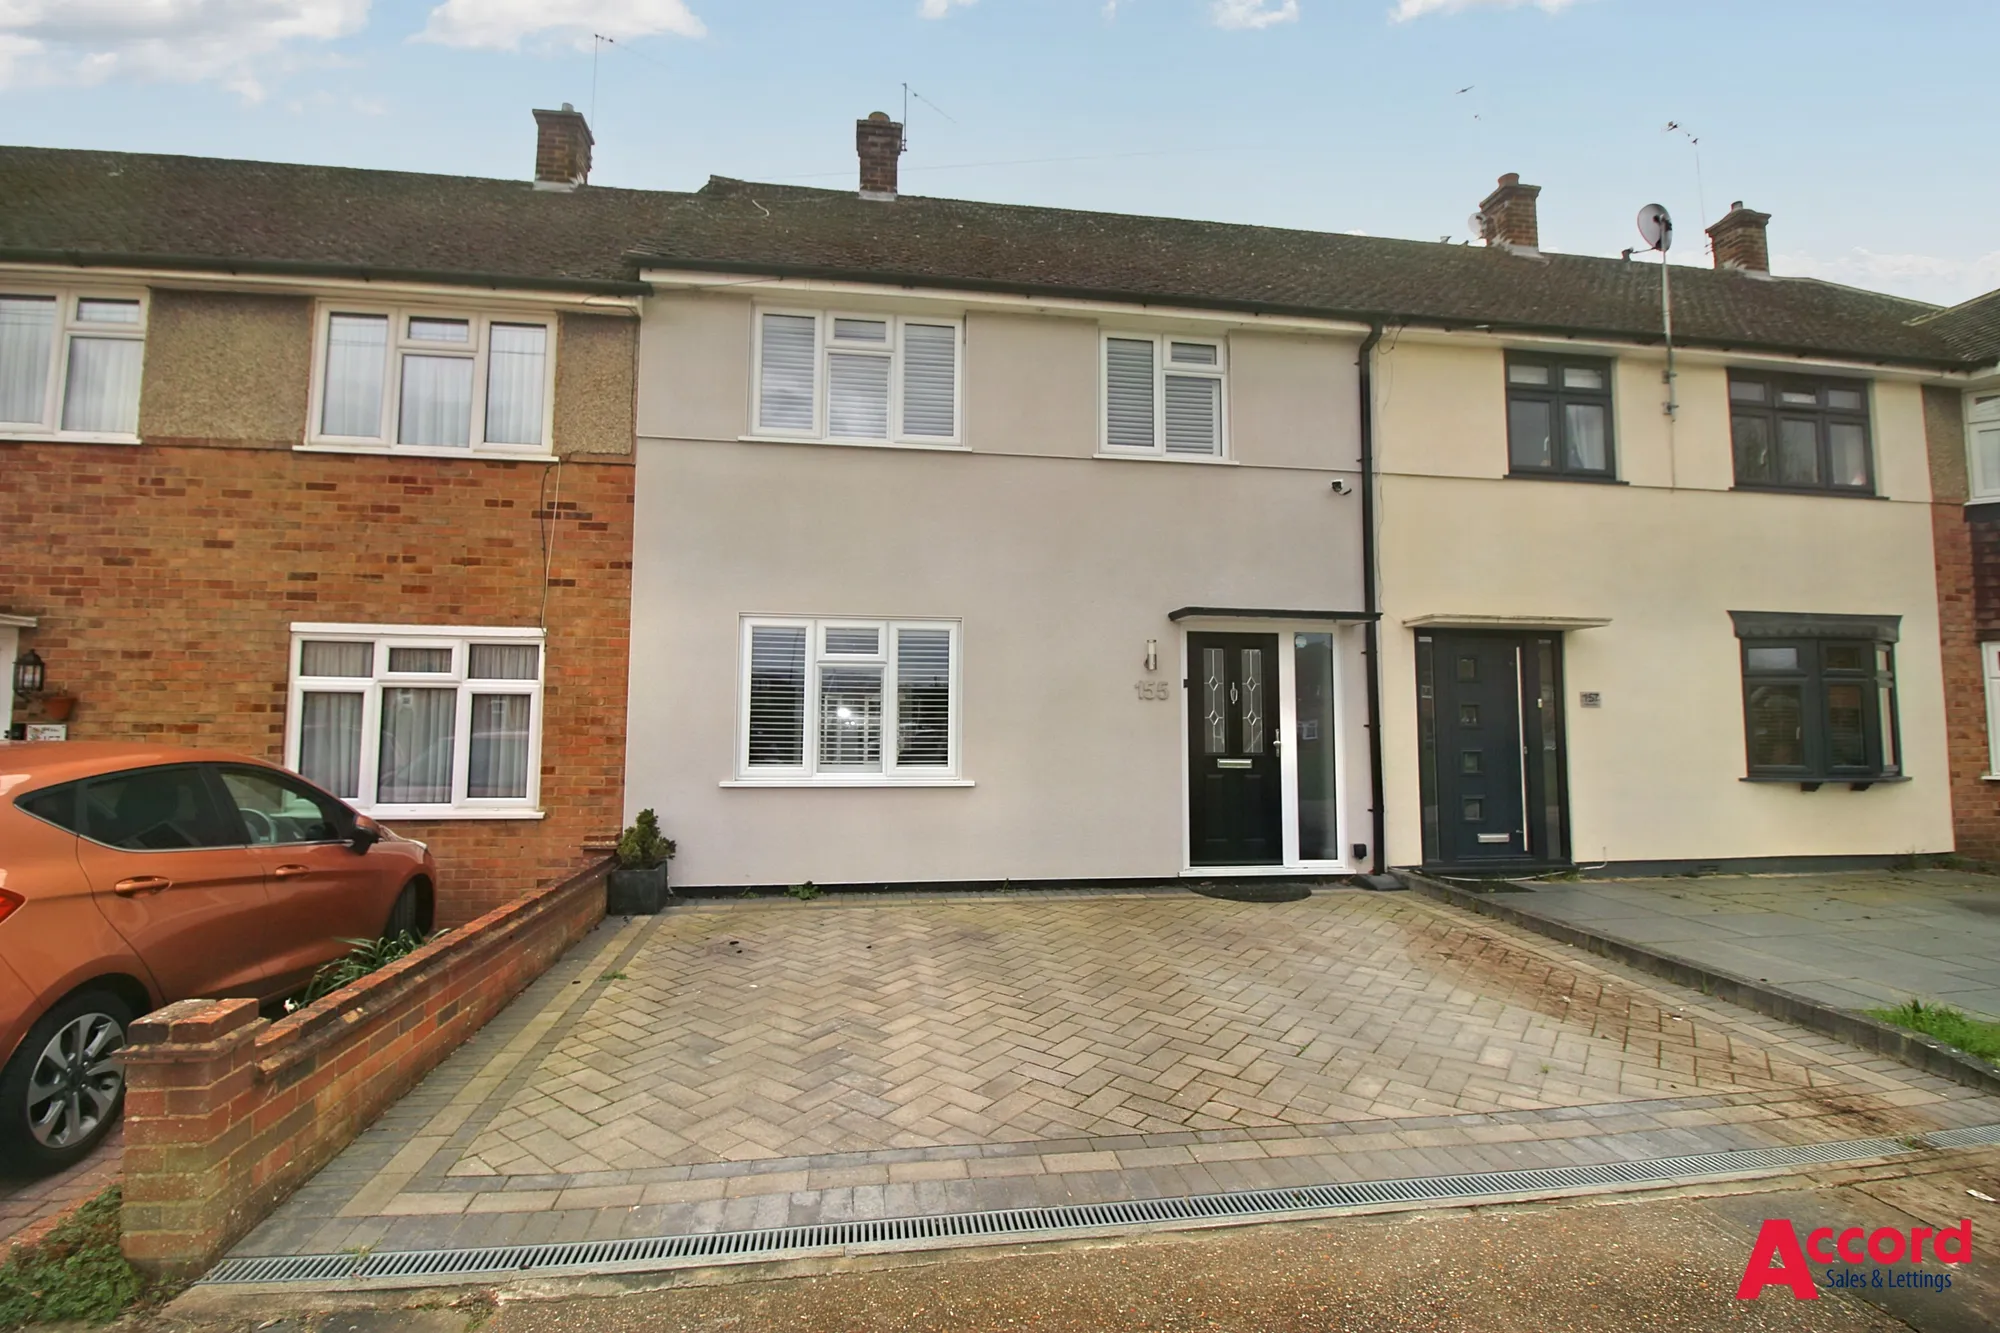 3 bed mid-terraced house to rent in Heron Way, Upminster - Property Image 1